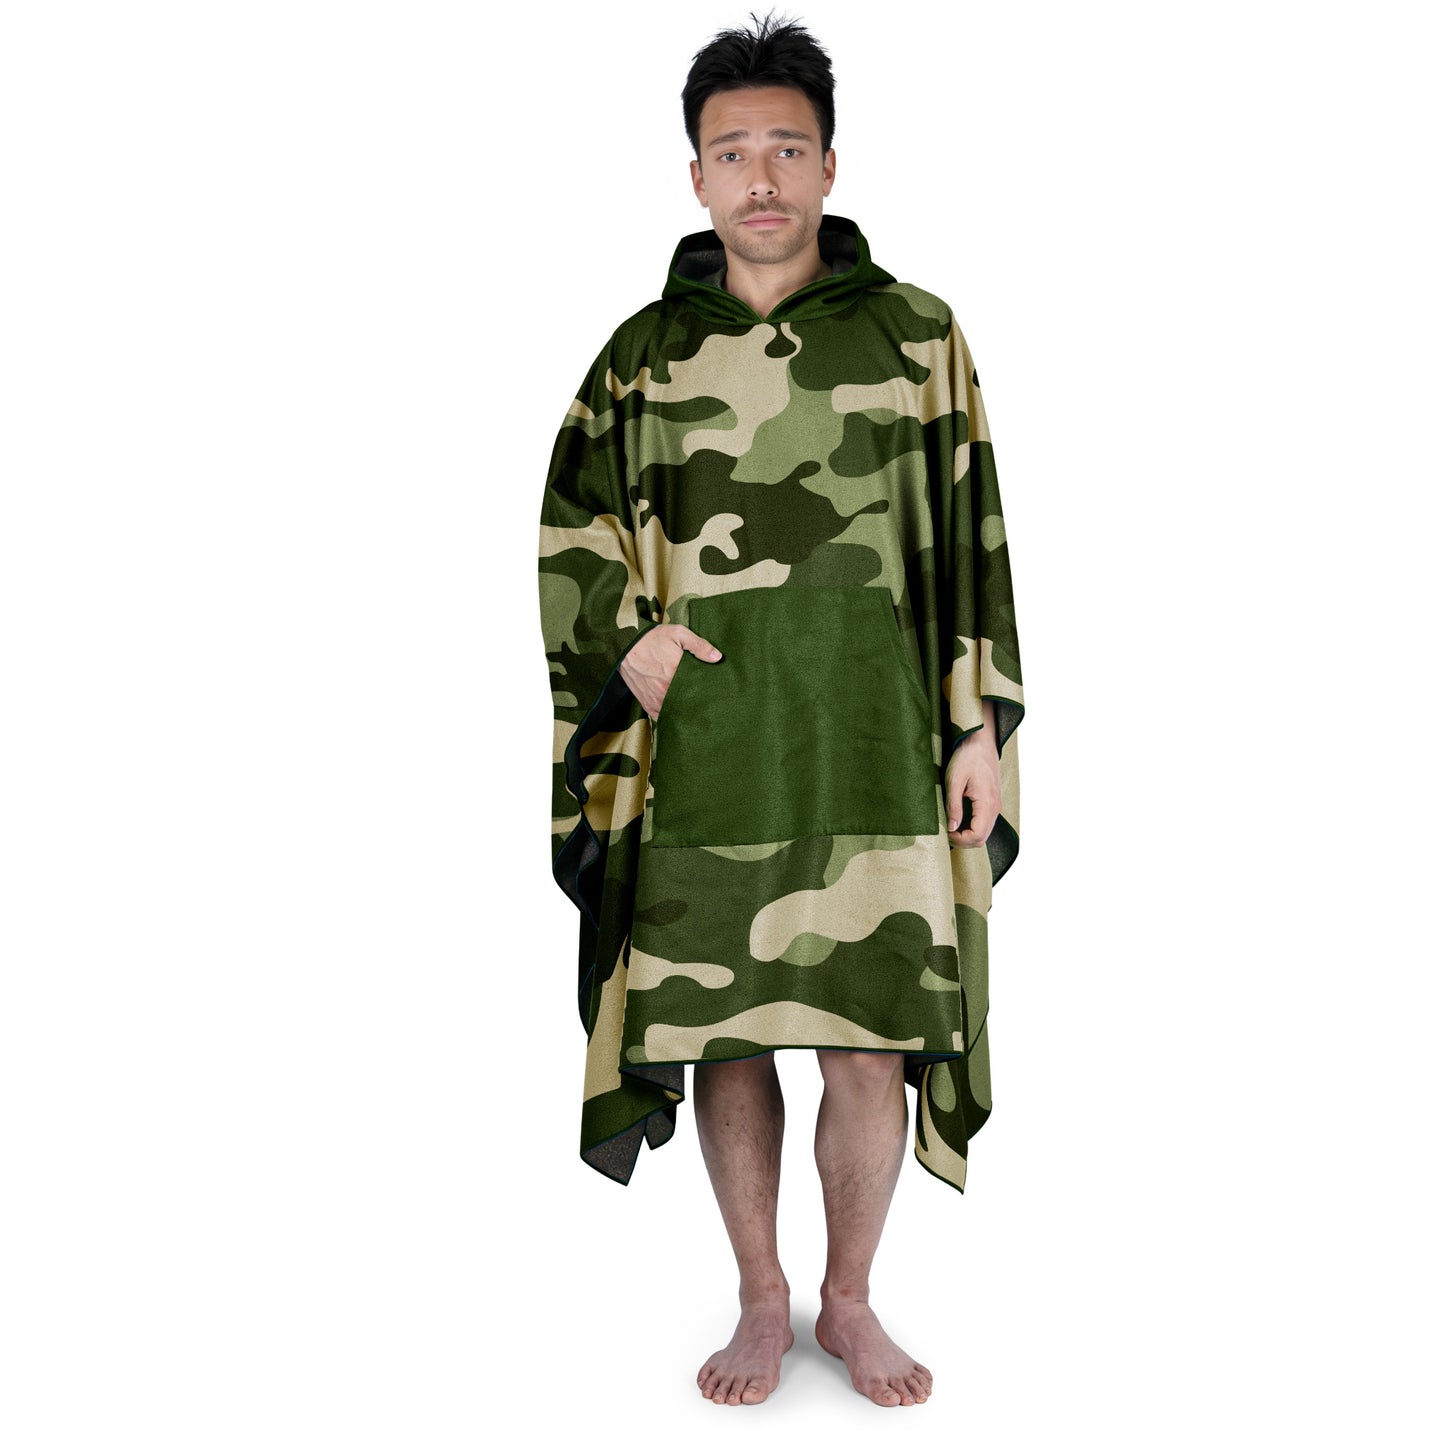 hooded poncho towel adult